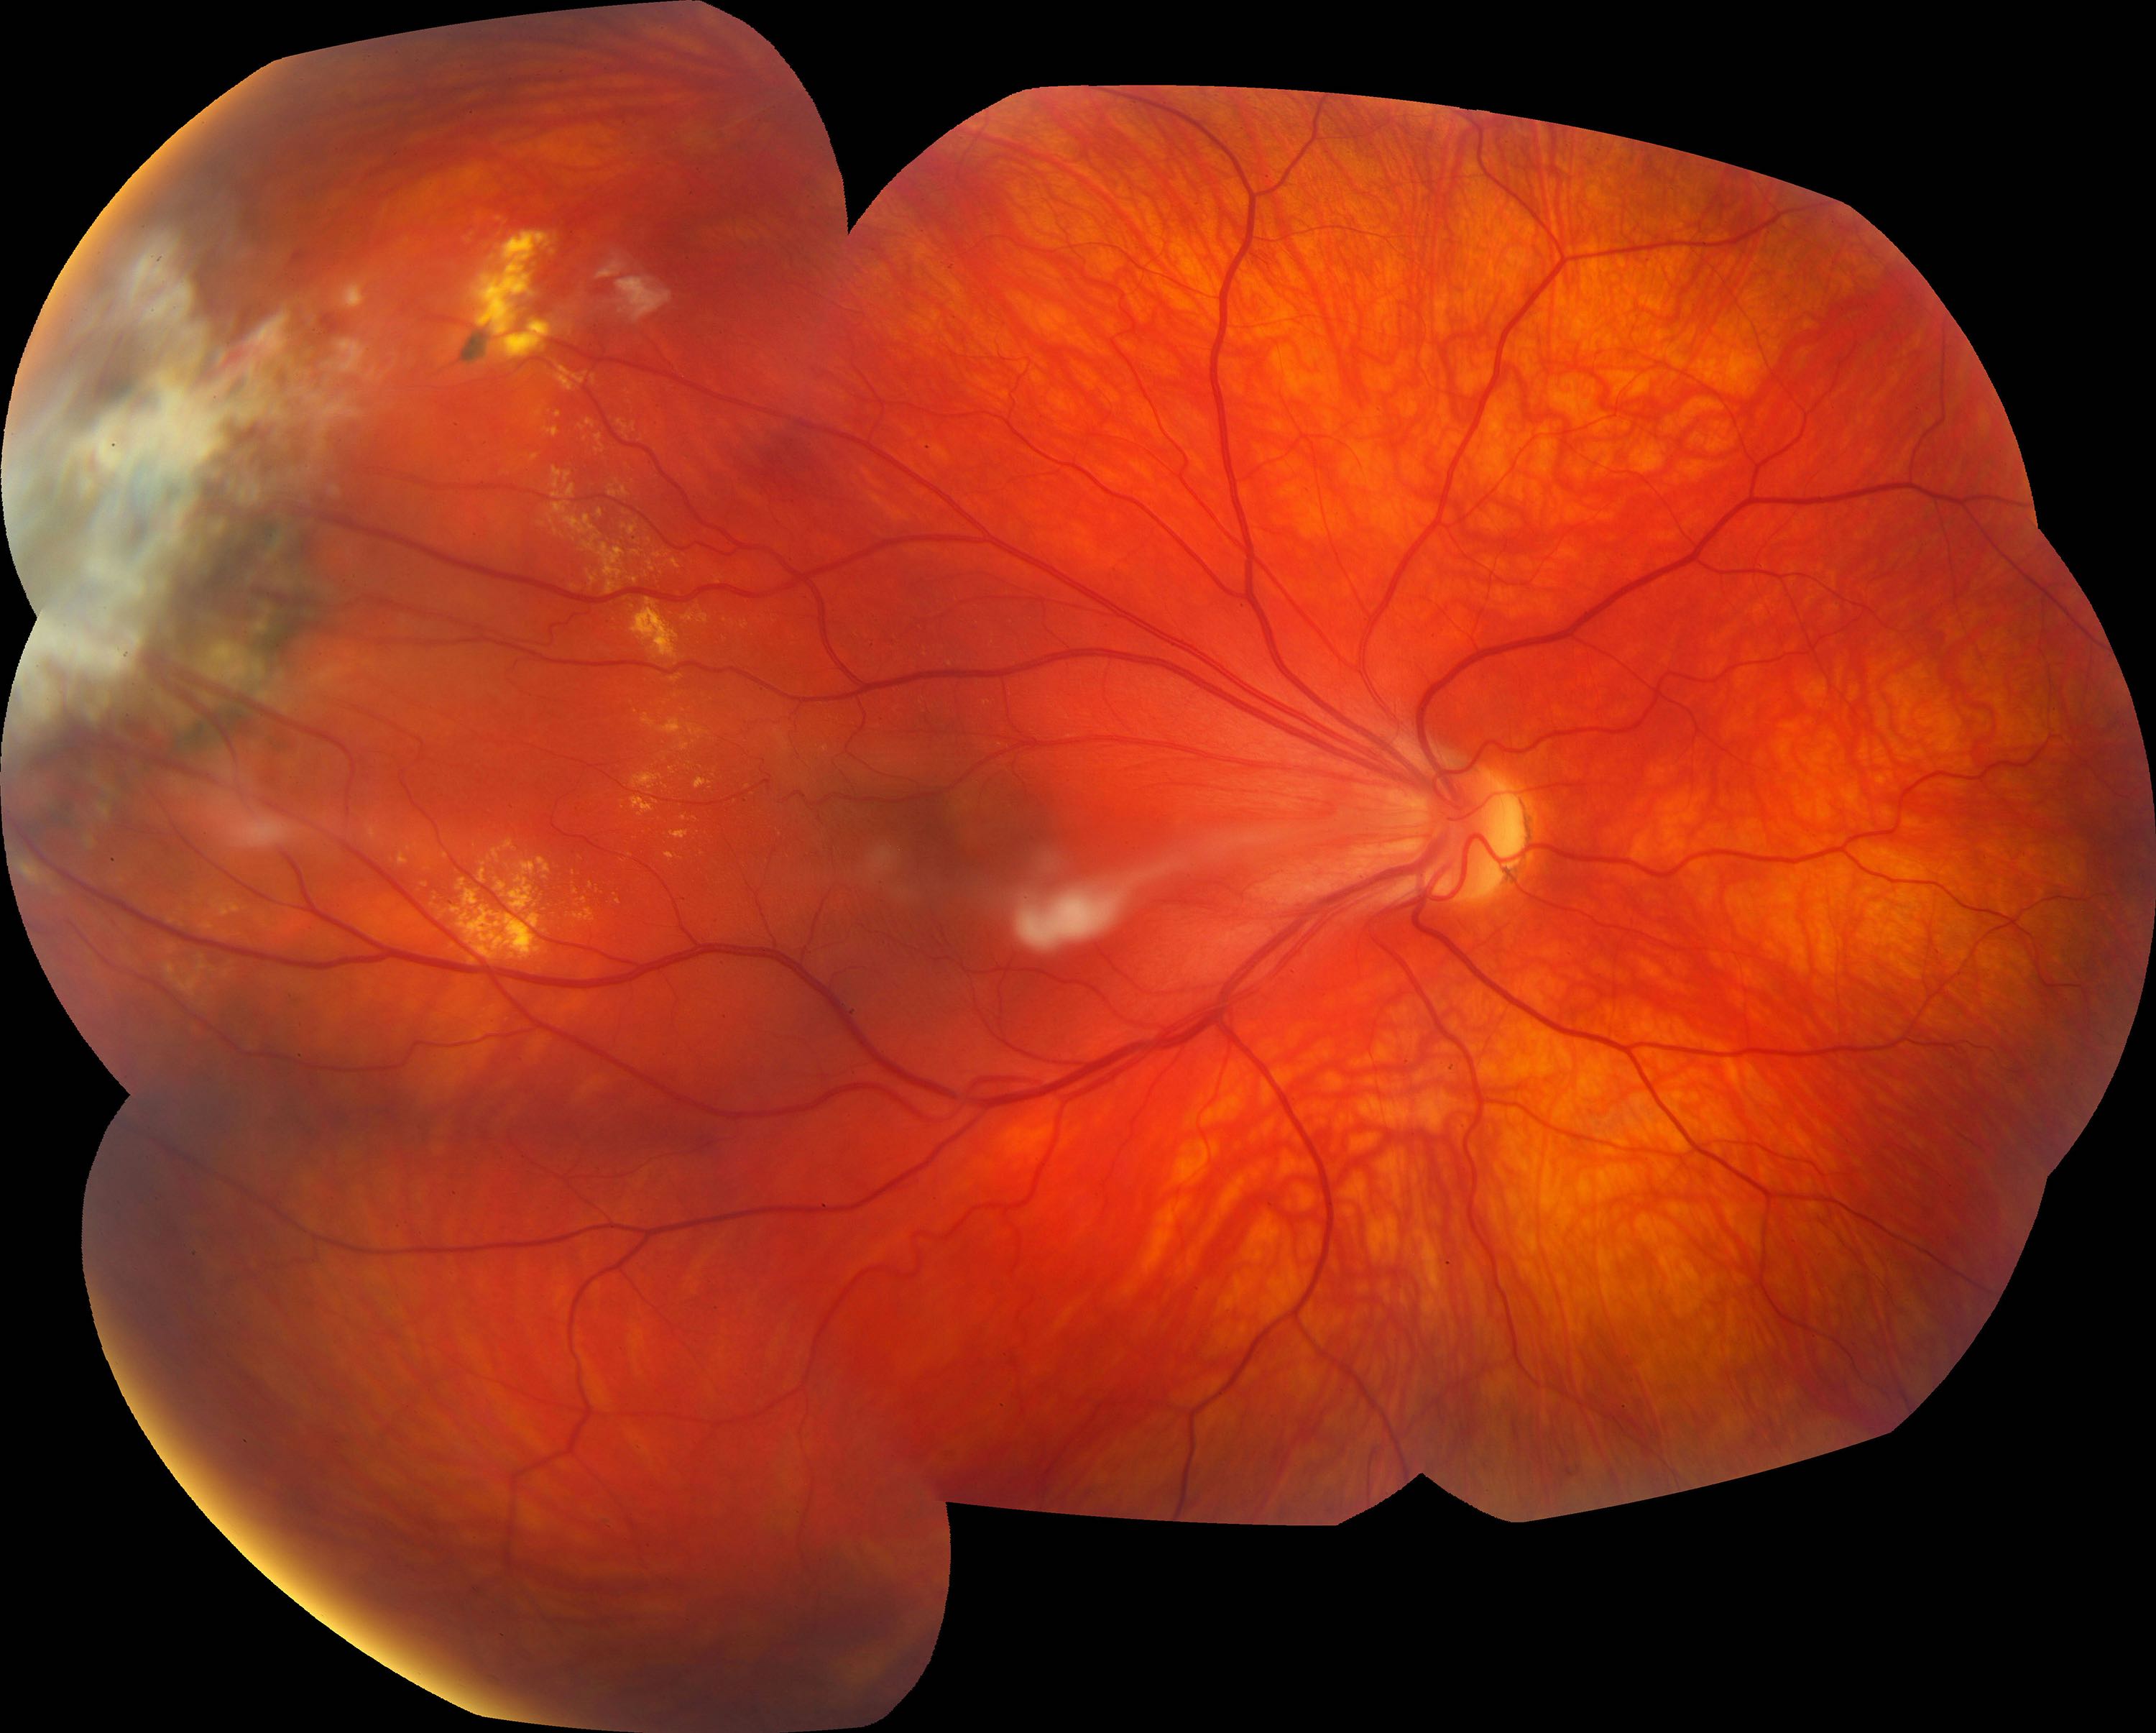 Macular edema in a case of familial exudative vitreoretinopathy: right fungus shows a tilted, small optic nerve with a vitreal adhesion from the disc to a temporal scar along with macular edema, temporal macular traction, epiretinal membrane, vascular dragging and tortuosity, as well as a fibrotic white lesion at 10 o’clock, surrounded by retinal pigment epithelial changes, and nearby exudates.